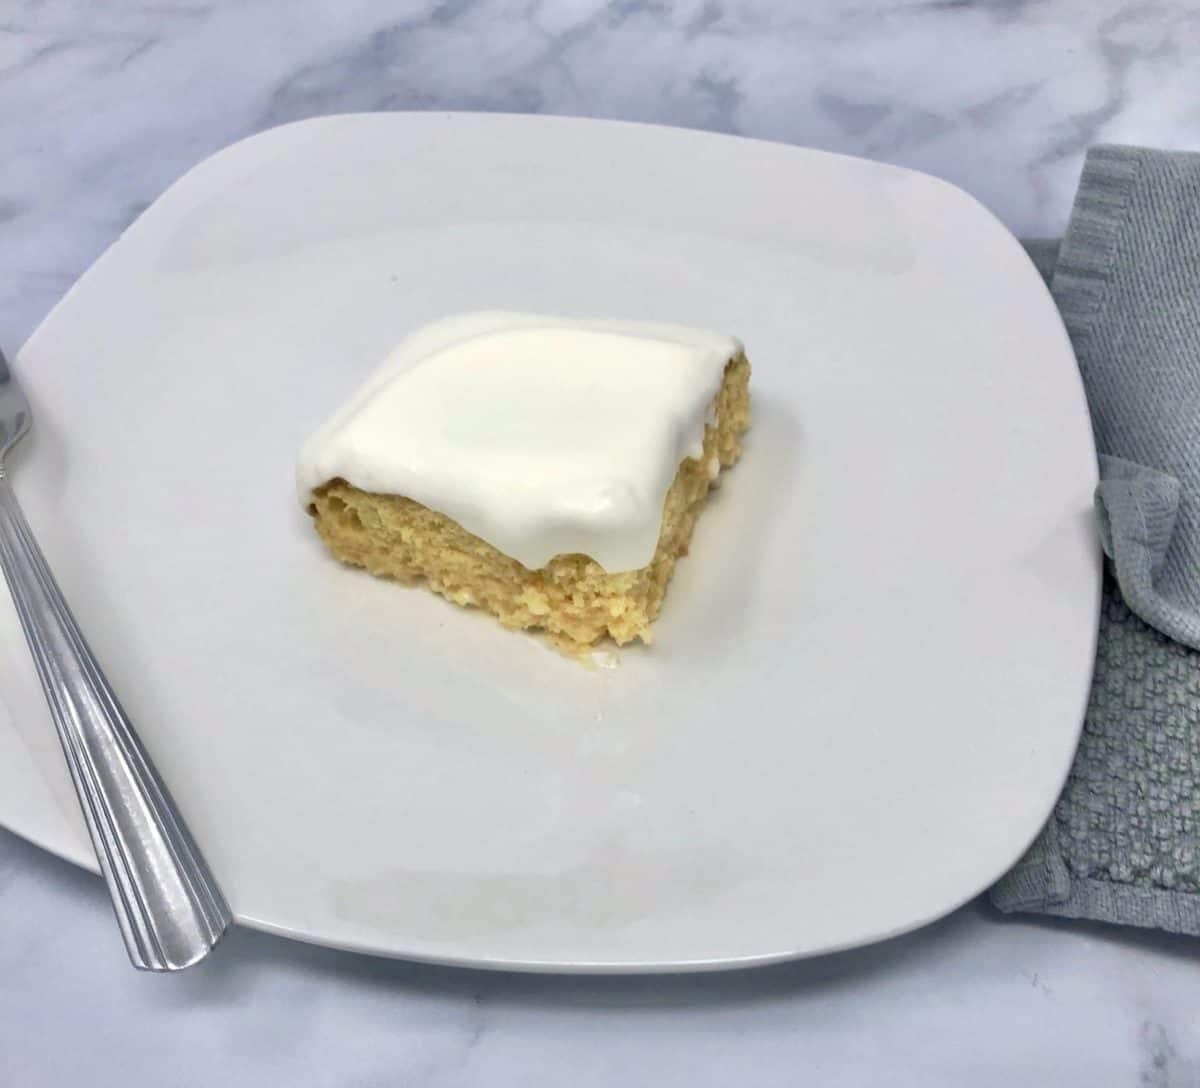 A piece of shortcut tres leches cake on a plate with a fork.